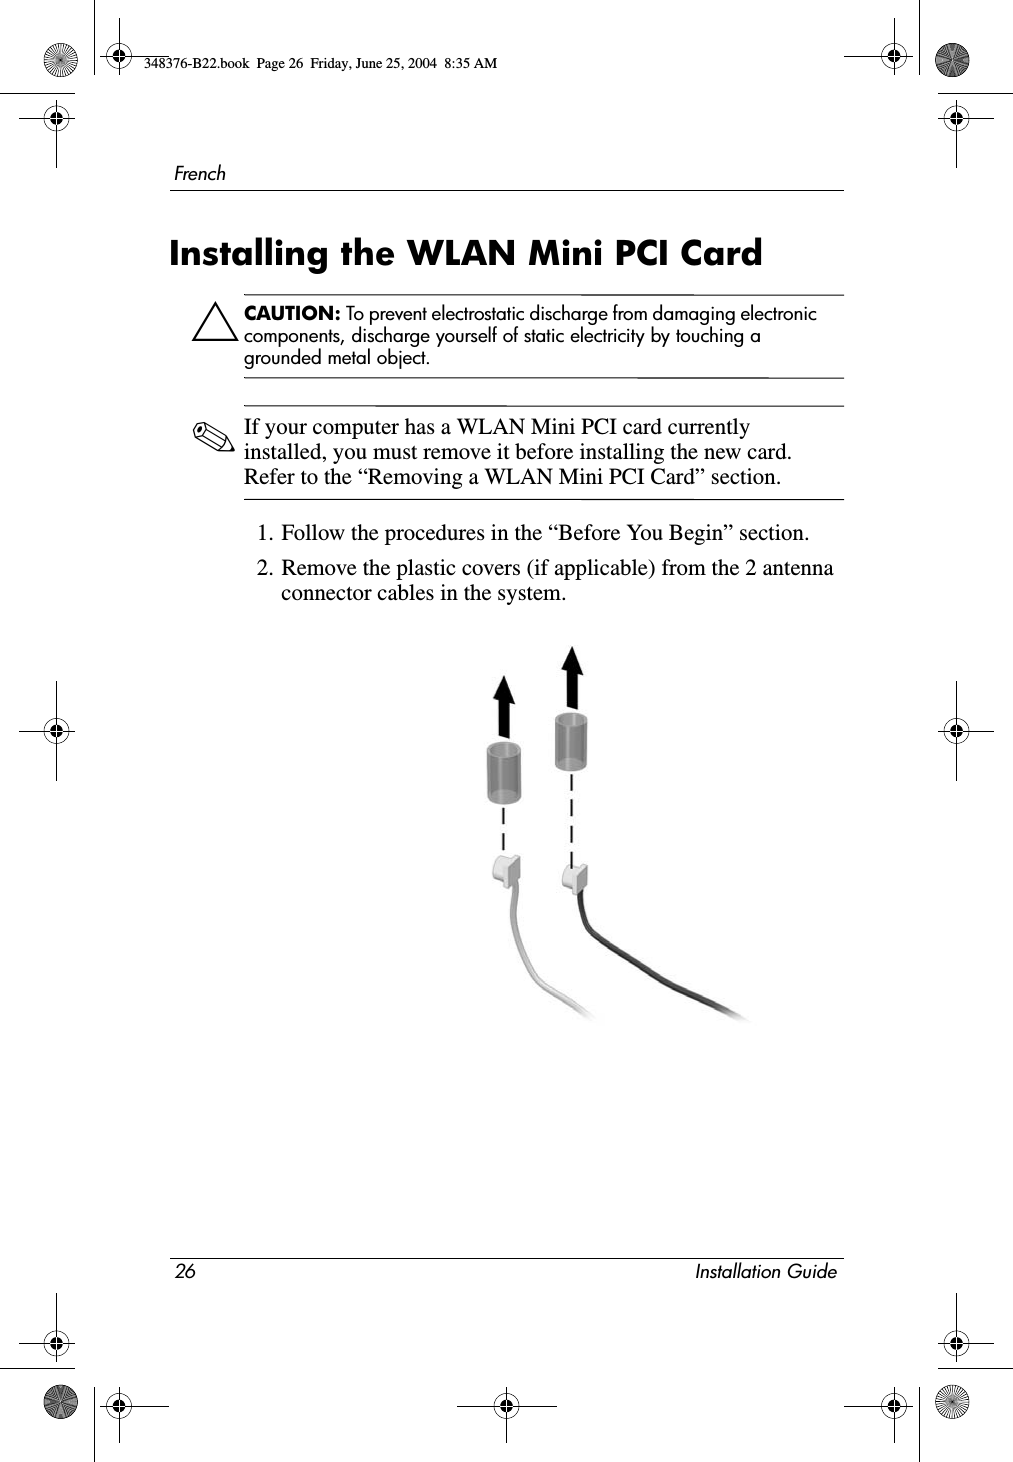 26 Installation GuideFrenchInstalling the WLAN Mini PCI CardÄCAUTION: To prevent electrostatic discharge from damaging electronic components, discharge yourself of static electricity by touching a grounded metal object.✎If your computer has a WLAN Mini PCI card currently installed, you must remove it before installing the new card. Refer to the “Removing a WLAN Mini PCI Card” section.1. Follow the procedures in the “Before You Begin” section.2. Remove the plastic covers (if applicable) from the 2 antenna connector cables in the system.348376-B22.book  Page 26  Friday, June 25, 2004  8:35 AM